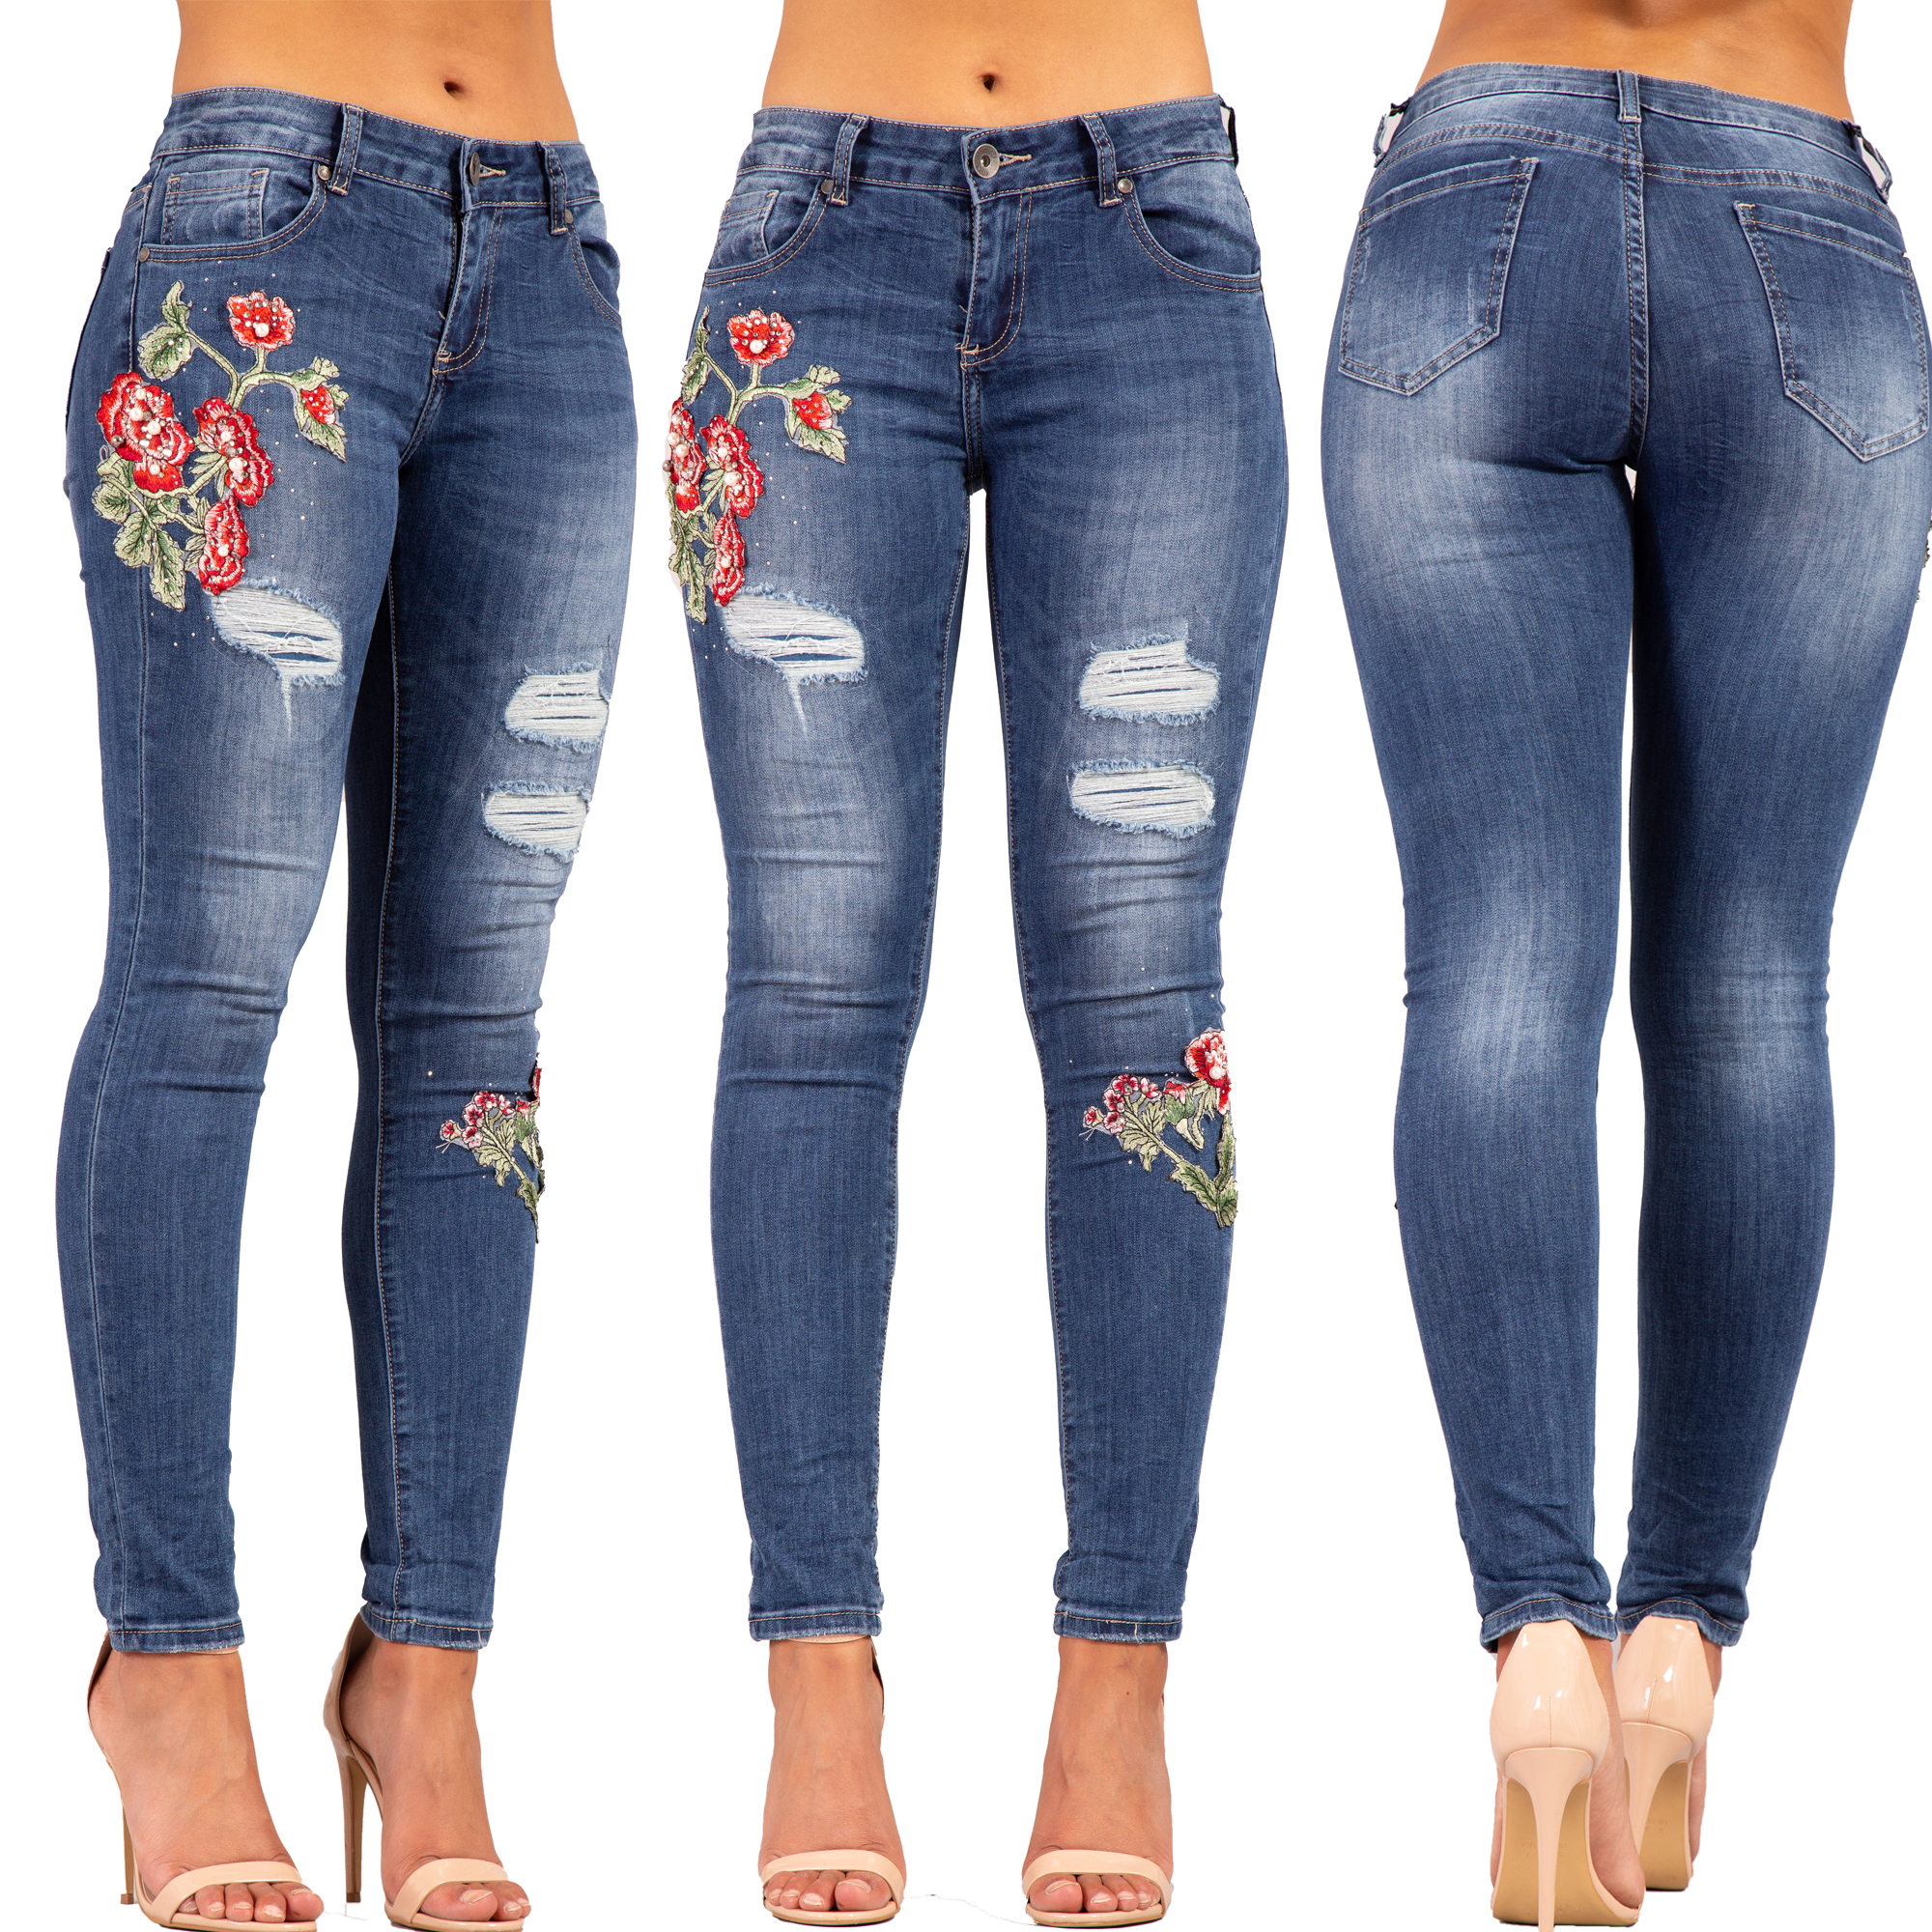 Jeans New Women Ladies Knee Rip Embroidered Flower Detail White Skinny ...